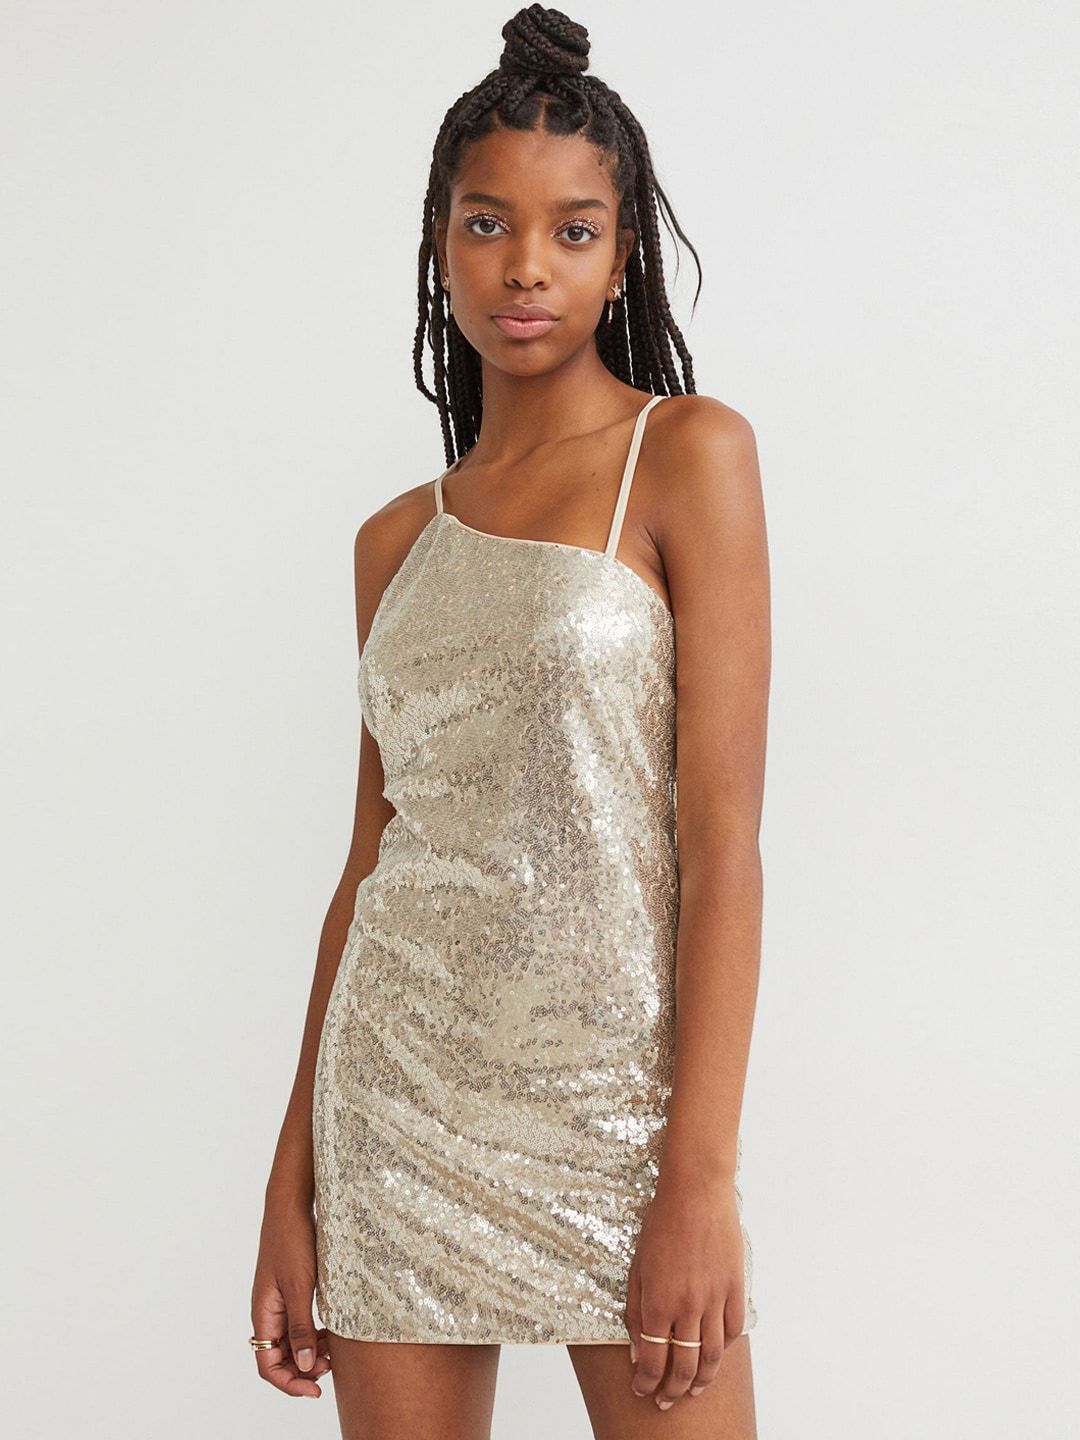 H&M Women Beige & Silver Sequined Dress Price in India